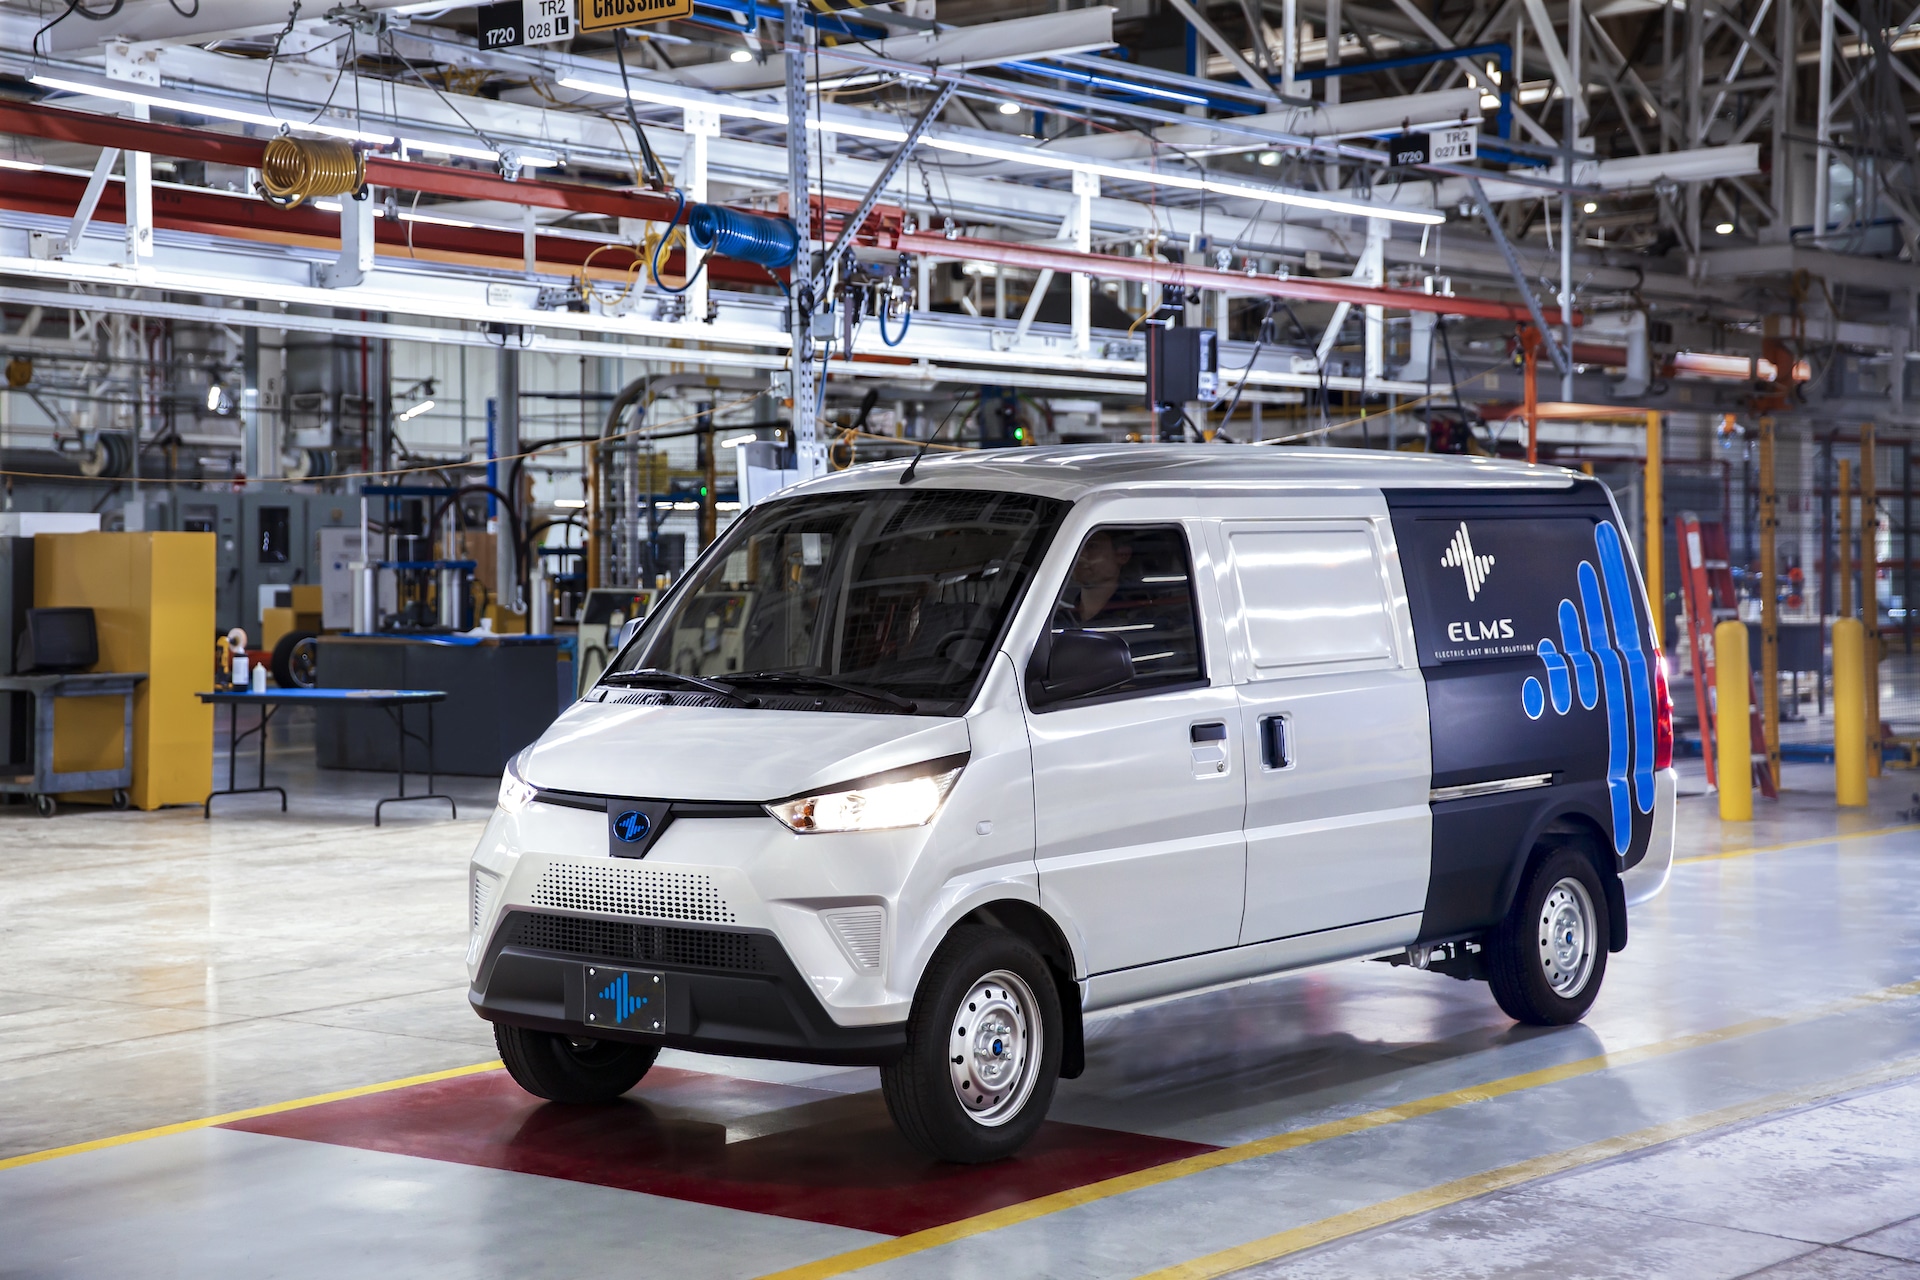 ELECTRIC LAST MILE SOLUTIONS SECURES 1,000 BINDING ORDERS AS START OF PRODUCTION BEGINS